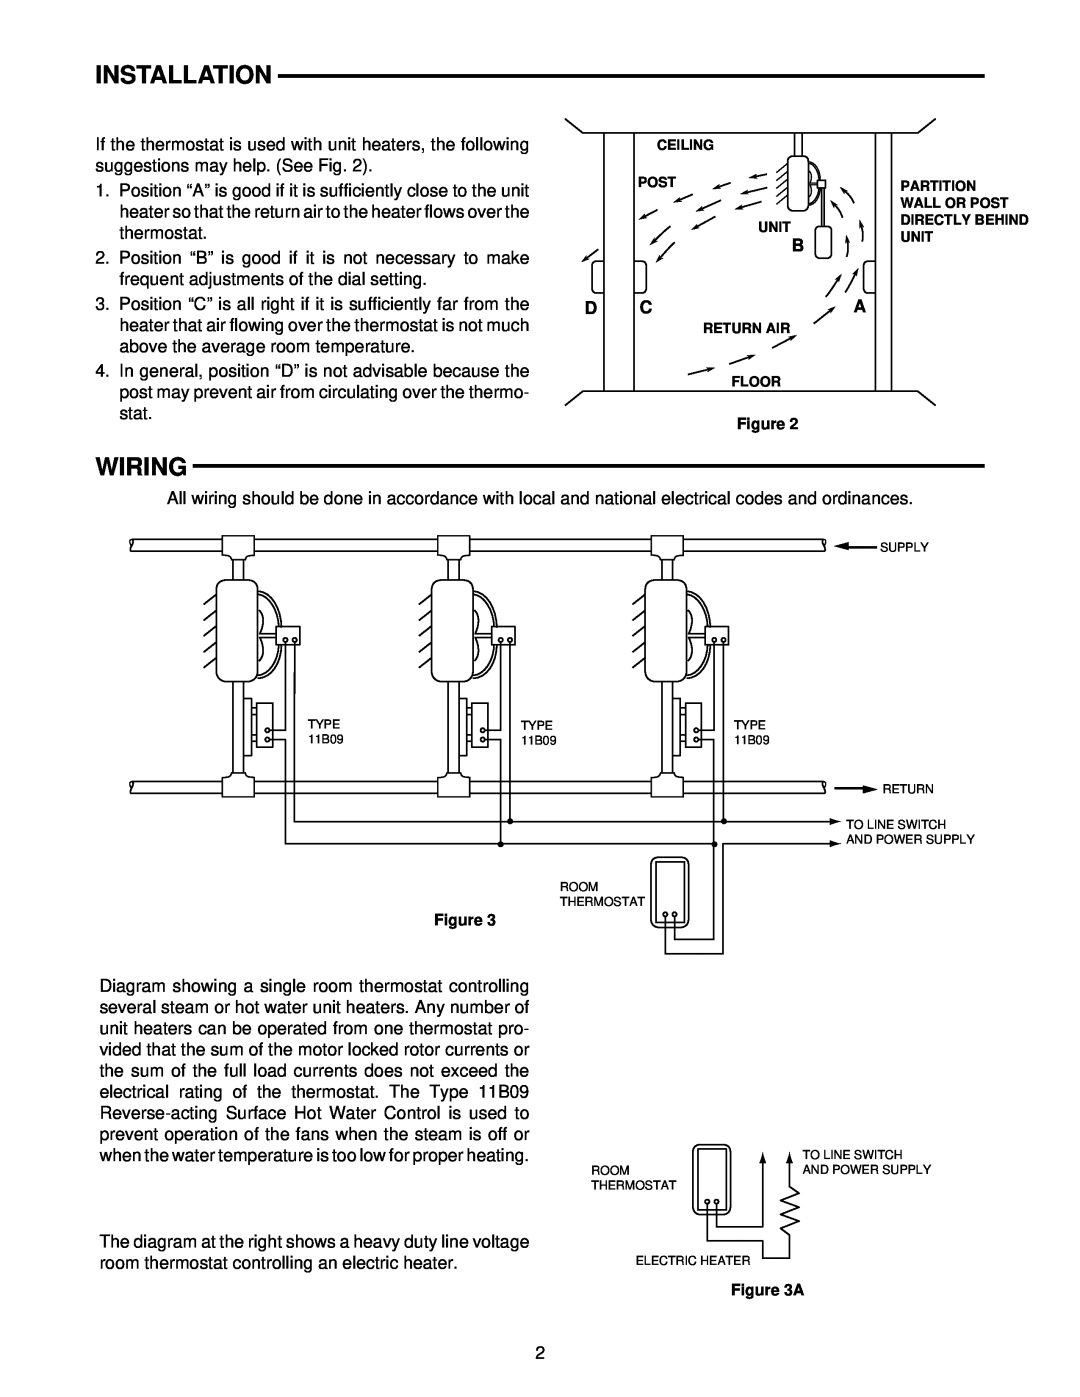 White Rodgers TYPE 152 installation instructions Wiring, Installation, stat 